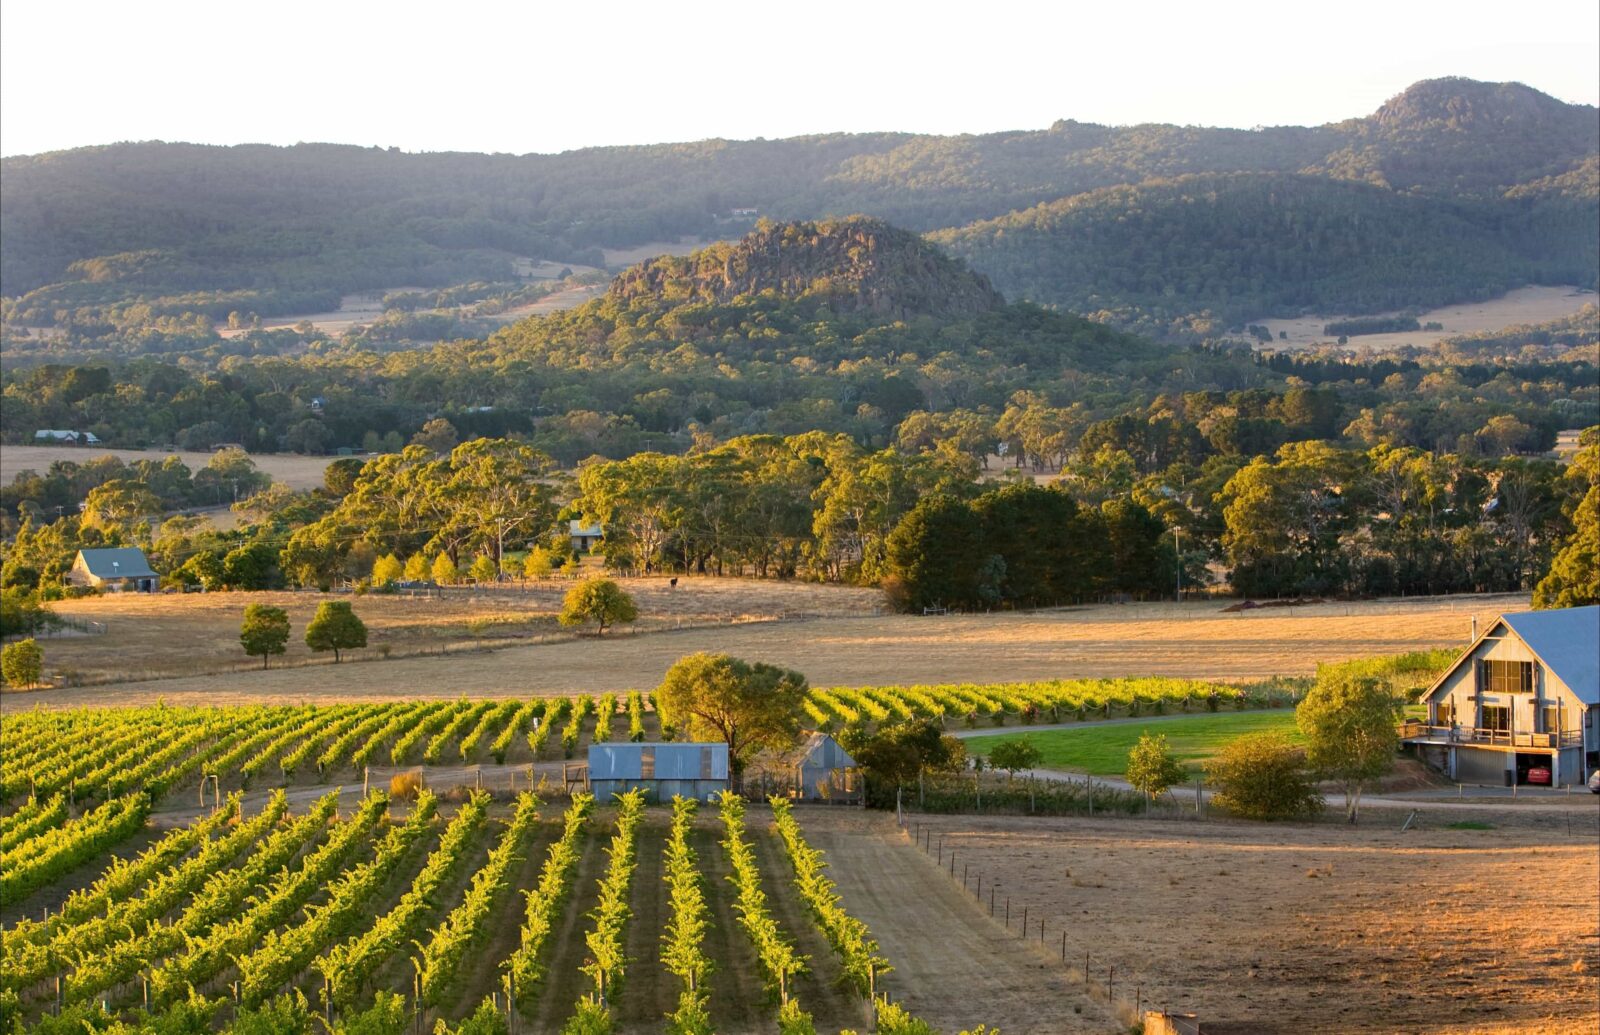 View of Hanging Rock from Hanging Rock Winery